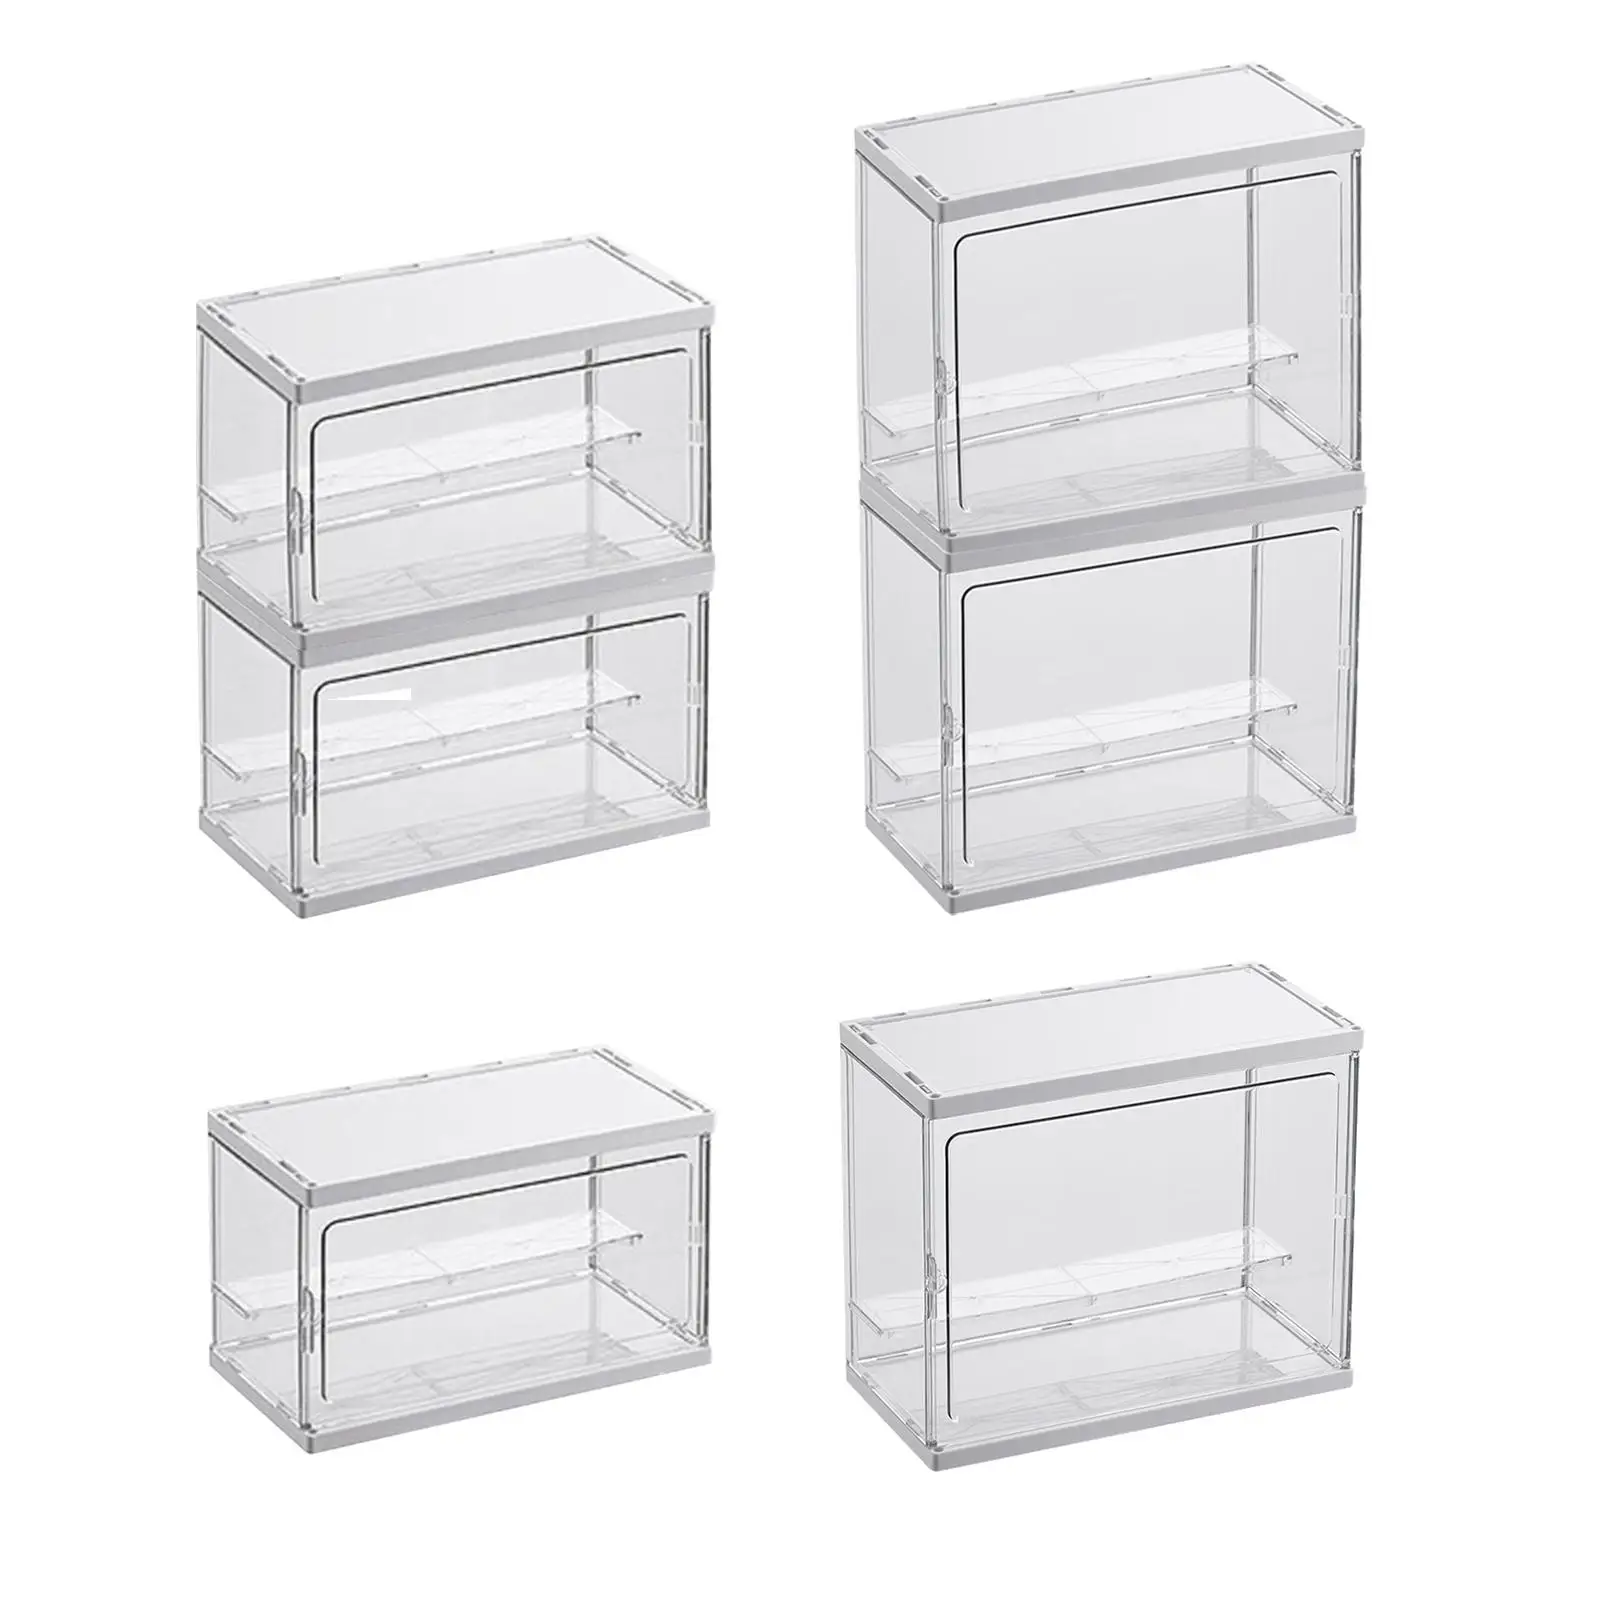 Display Case Action Figures Display Box Dustproof for Collectibles Toy Dolls